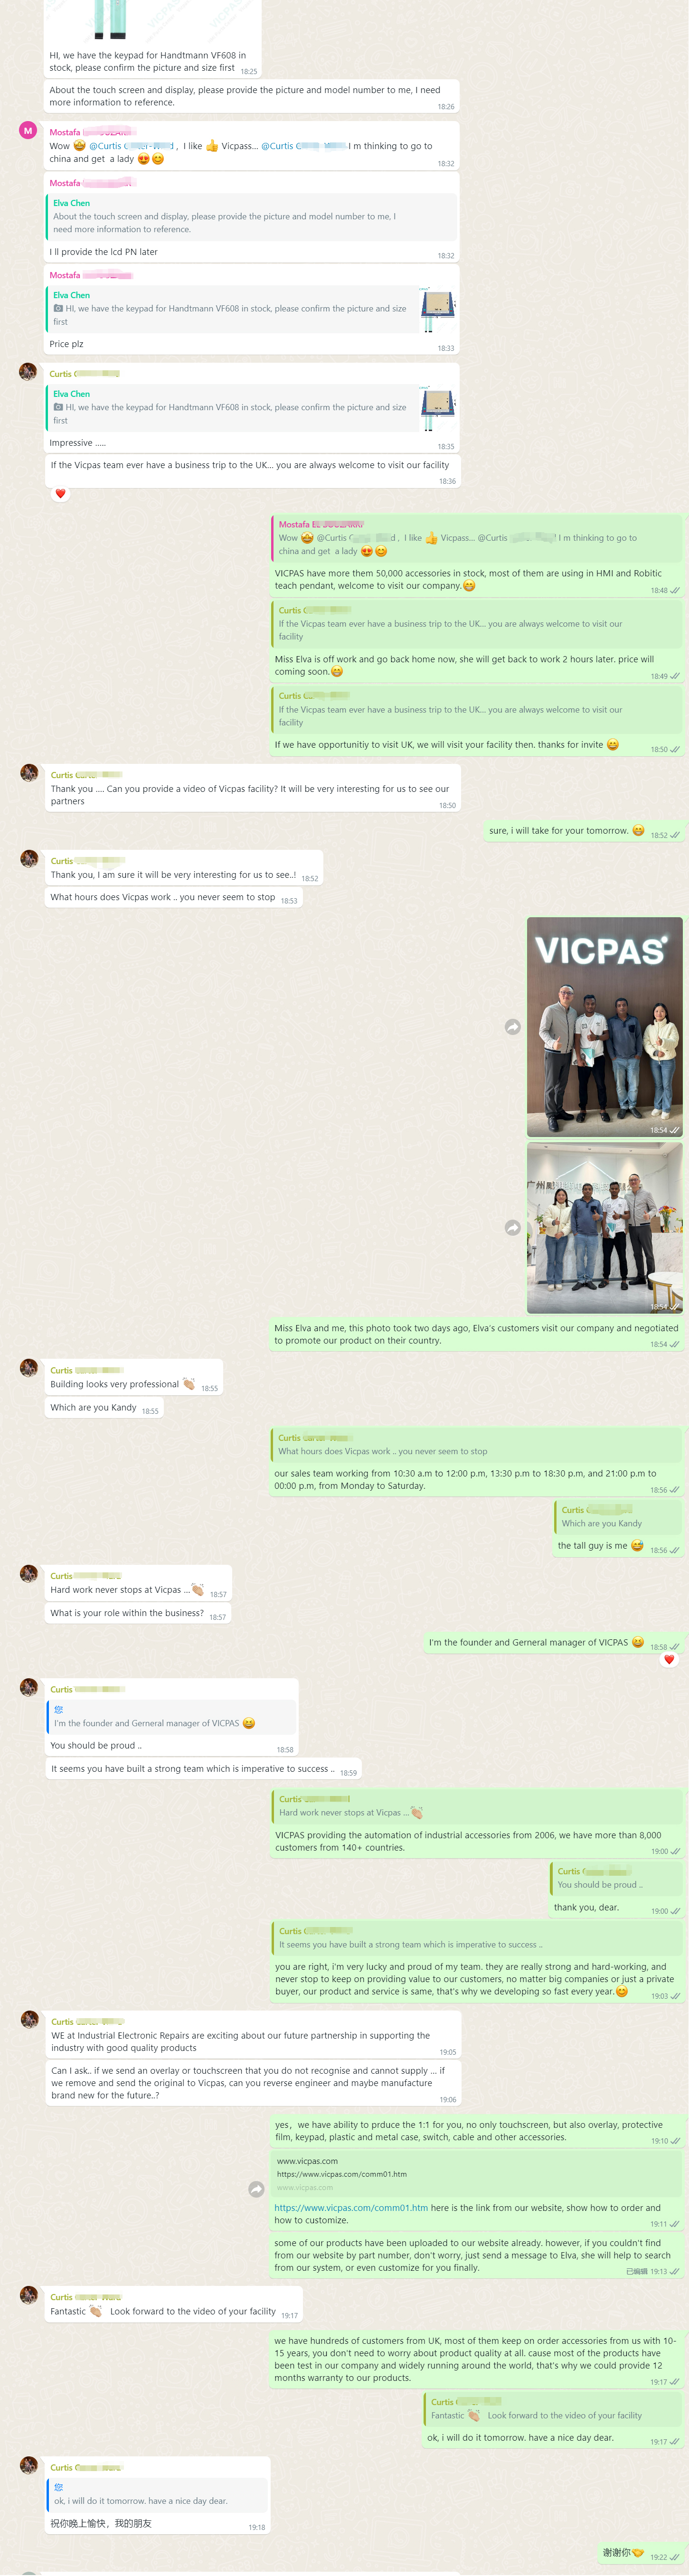 VICPAS | Customer Testimony: Customized Solutions, All Your Needs Covered!